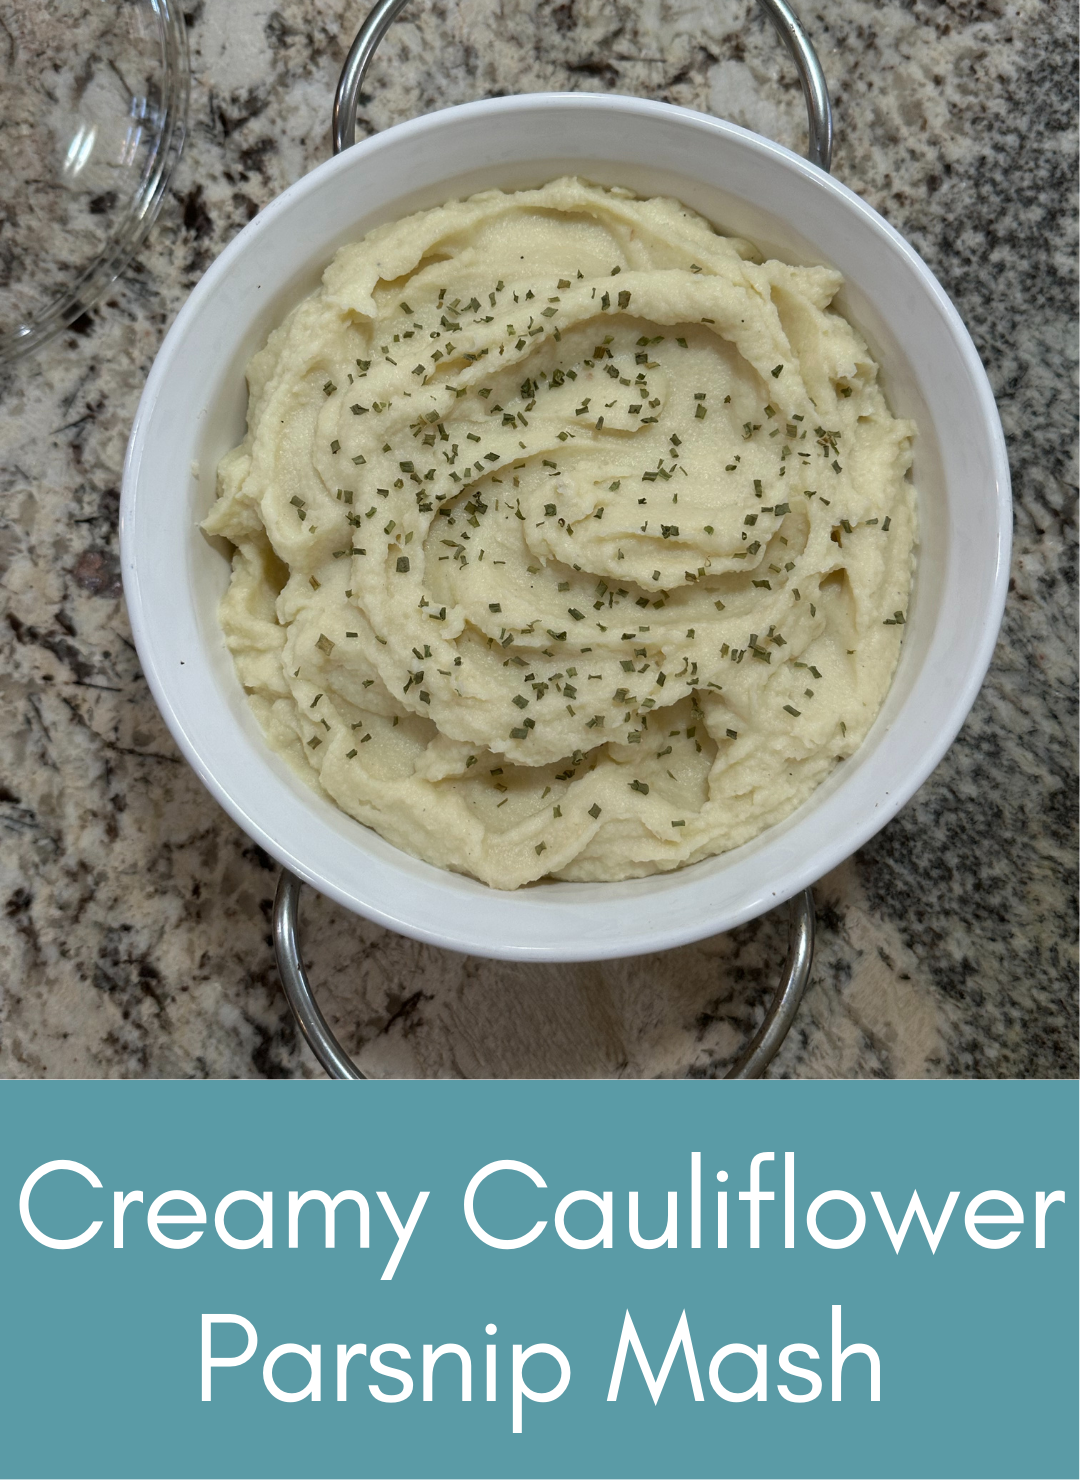 Creamy parsnip and cauliflower healthy mashed potato replacement Picture with link to recipe